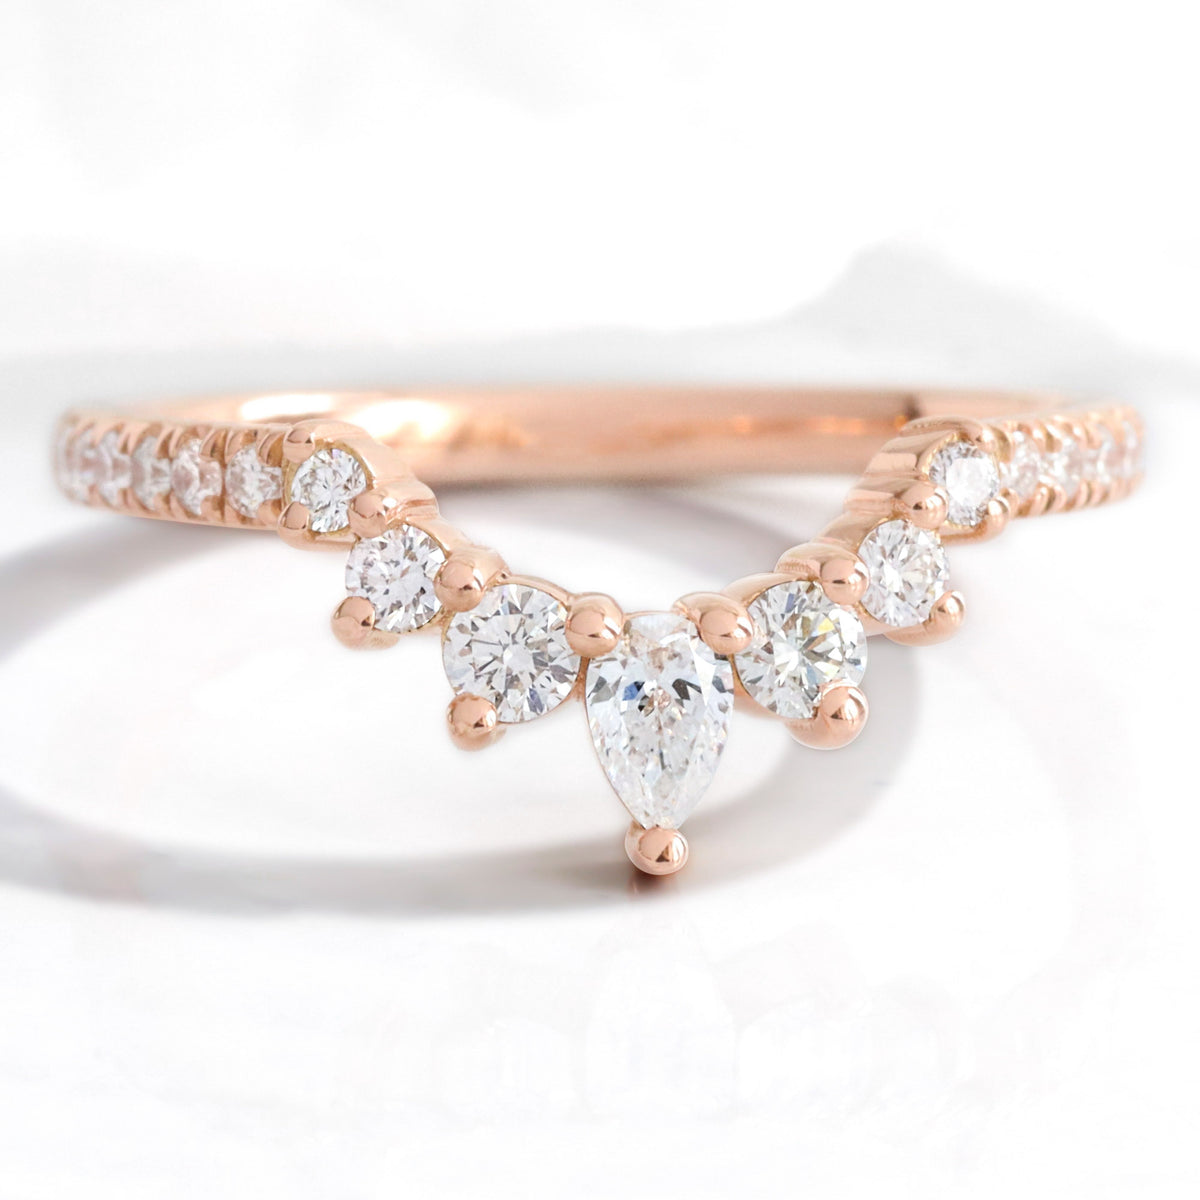 Pear and round diamond wedding ring rose gold u shaped curved pave wedding band la more design jewelry